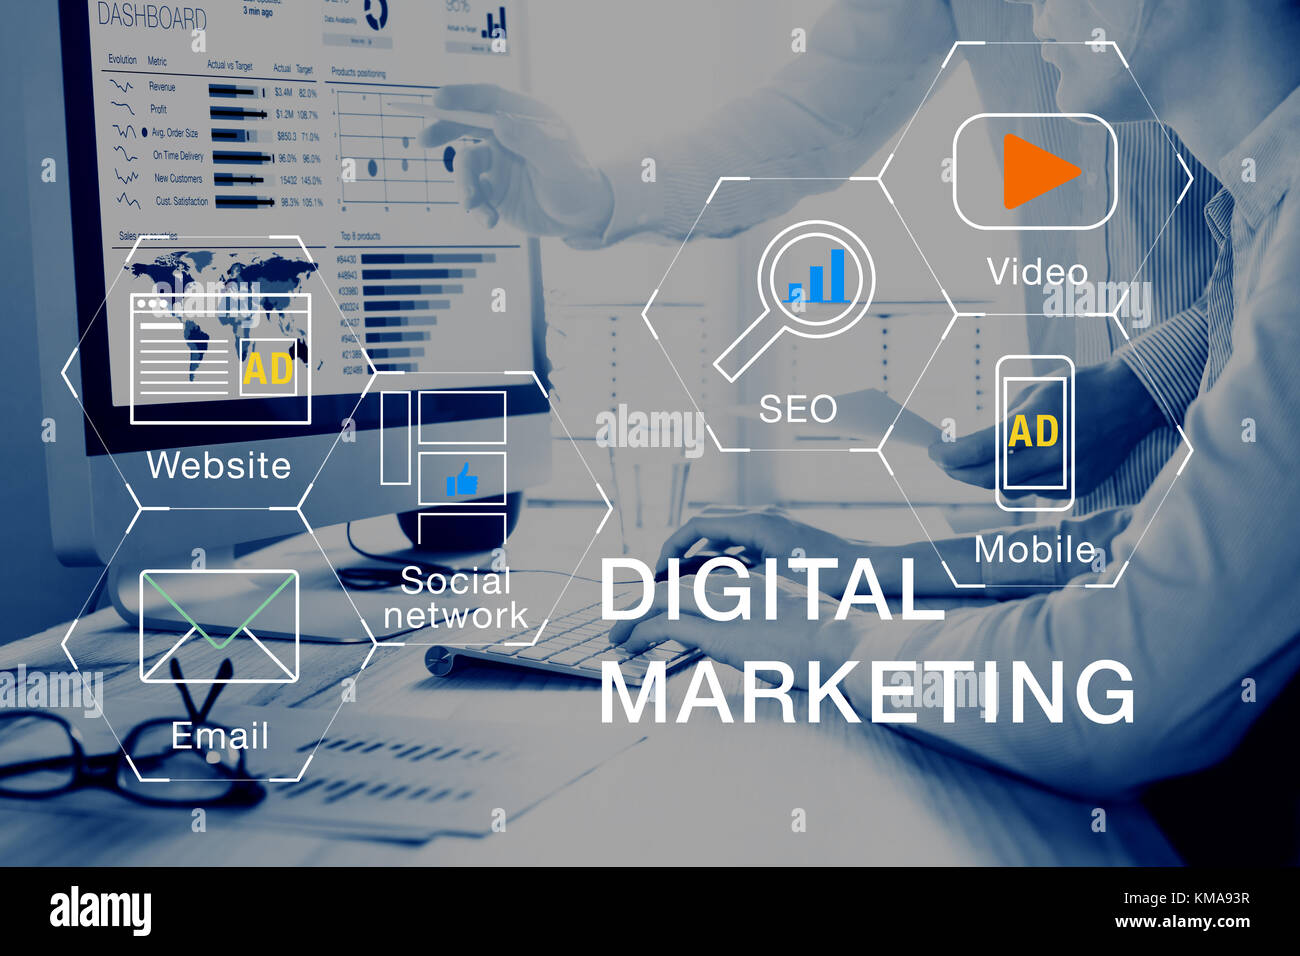 Concept of digital marketing media (website ad, email, social network, SEO, video, mobile app) with icon, and team analyzing return on investment (ROI Stock Photo